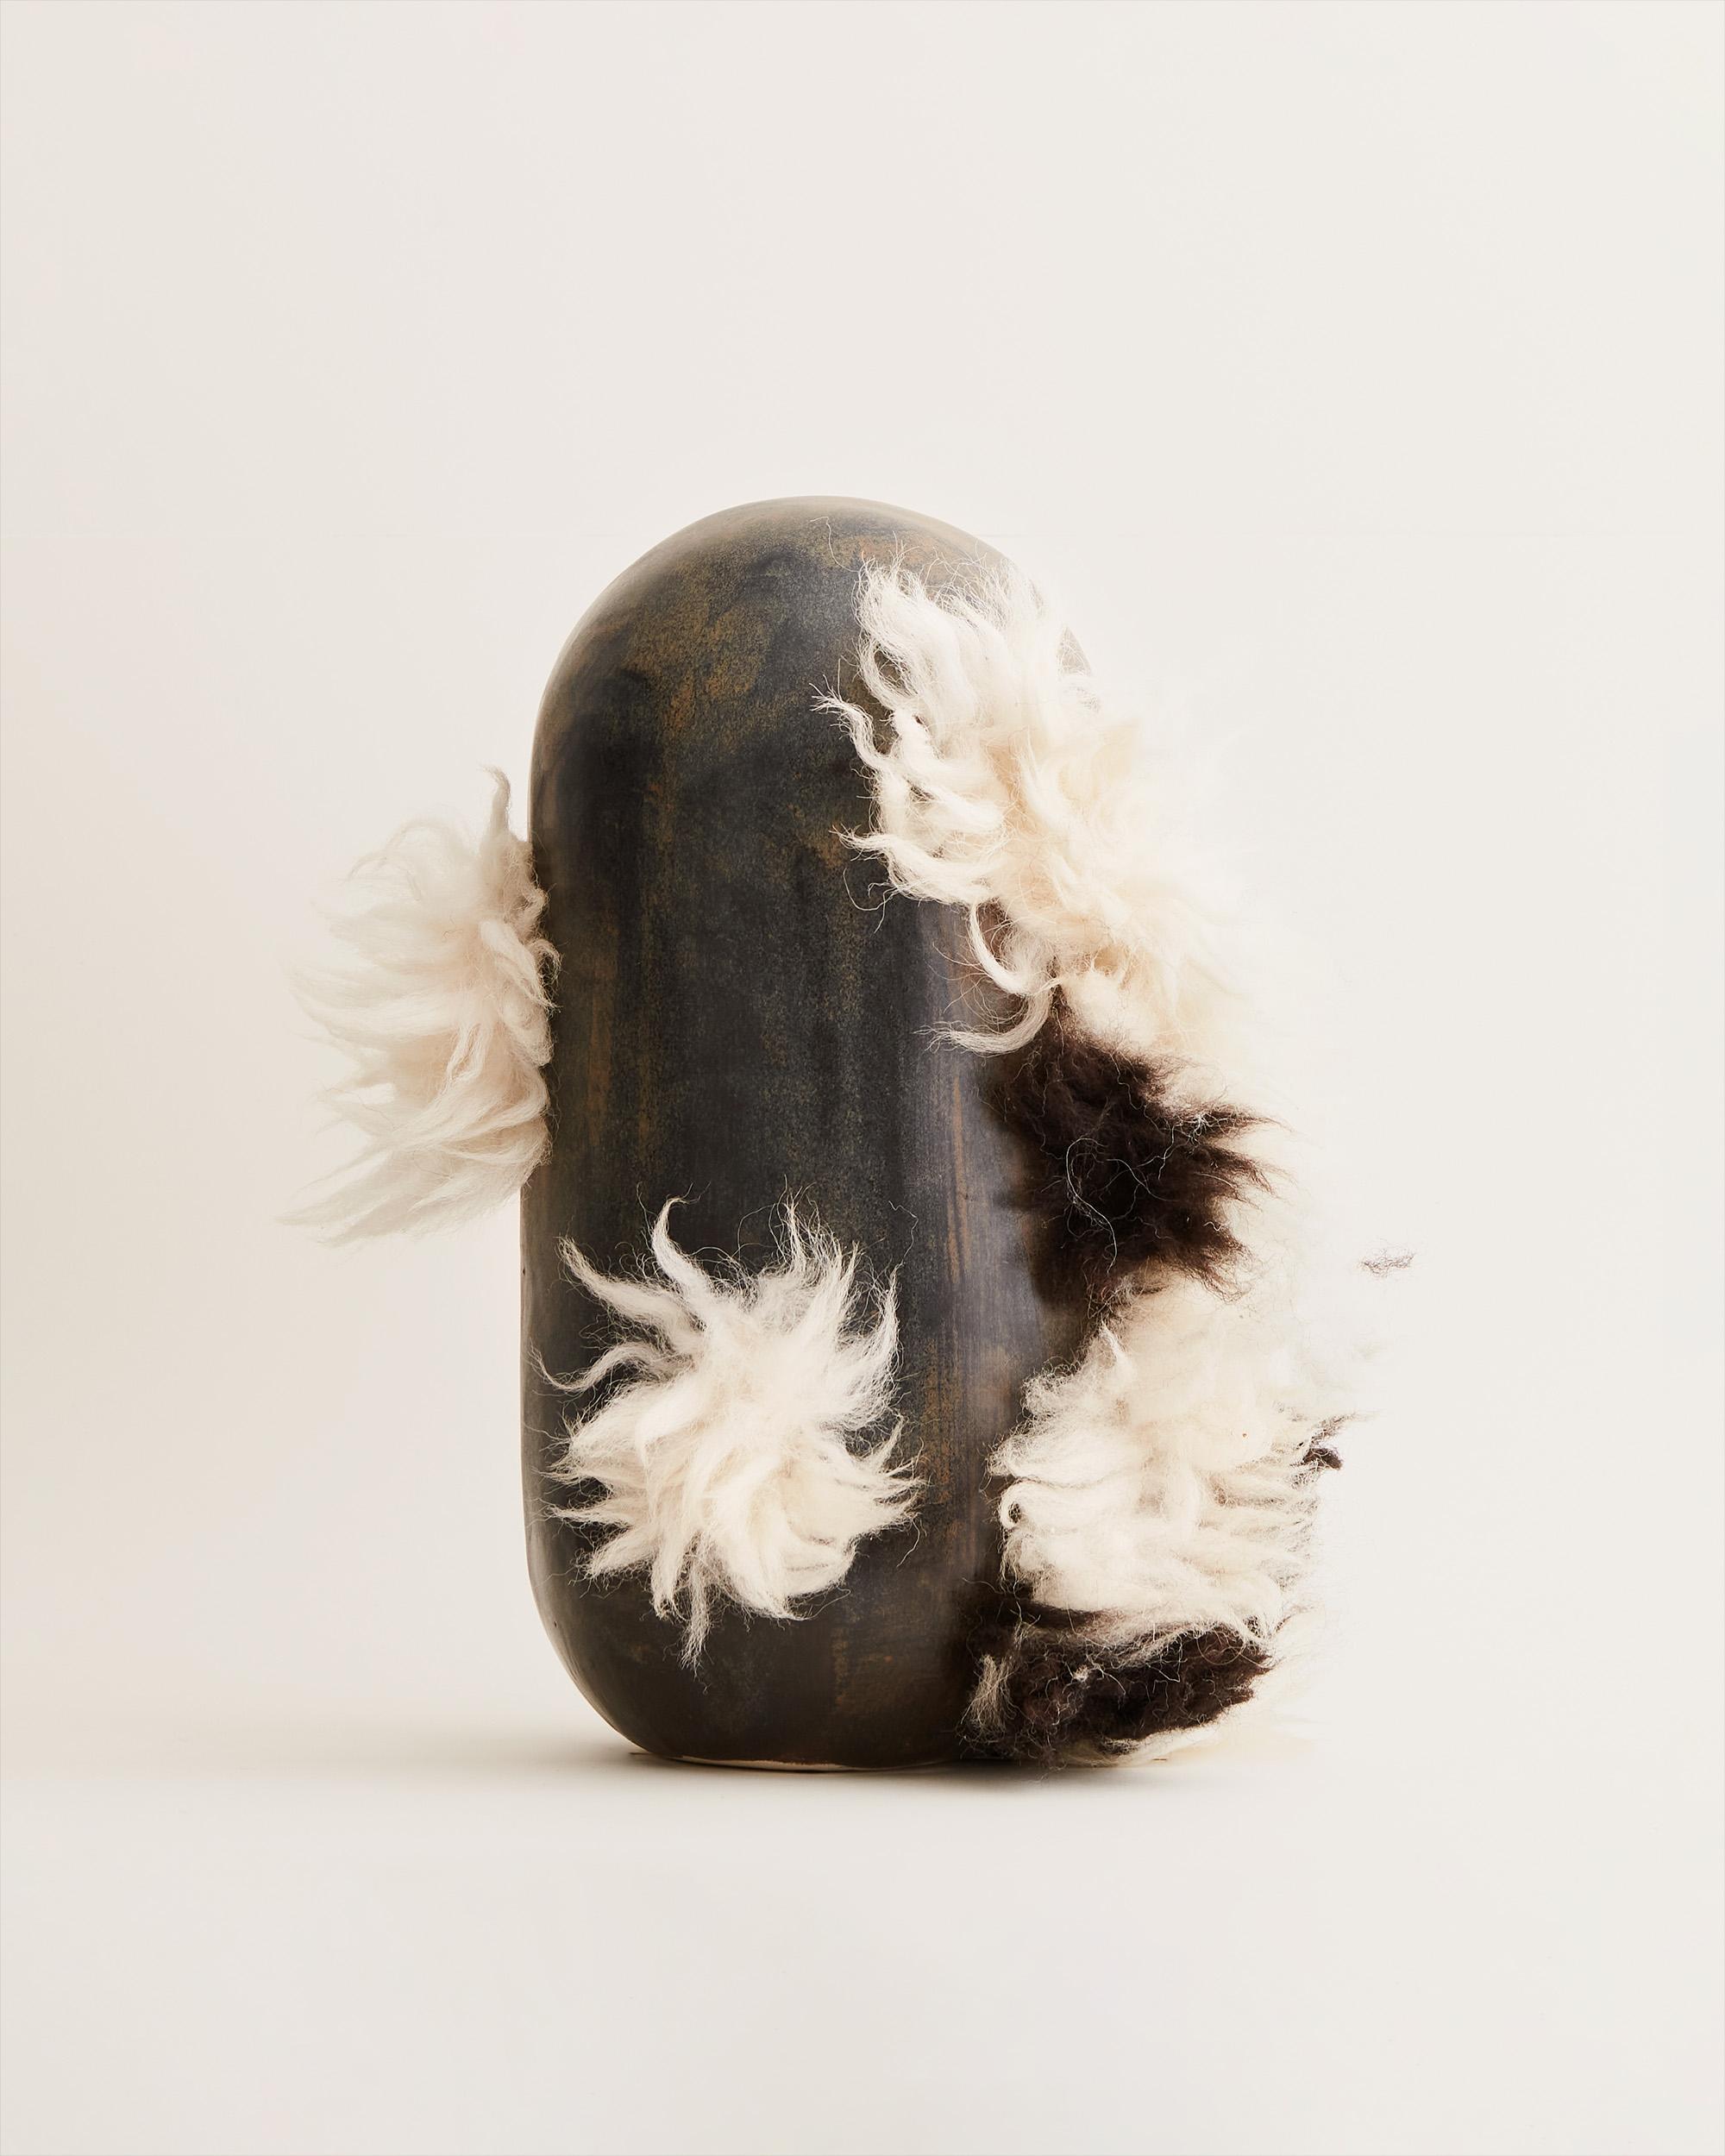 Momo Tetis - Contemporary Abstract Ceramic with fur sculpture